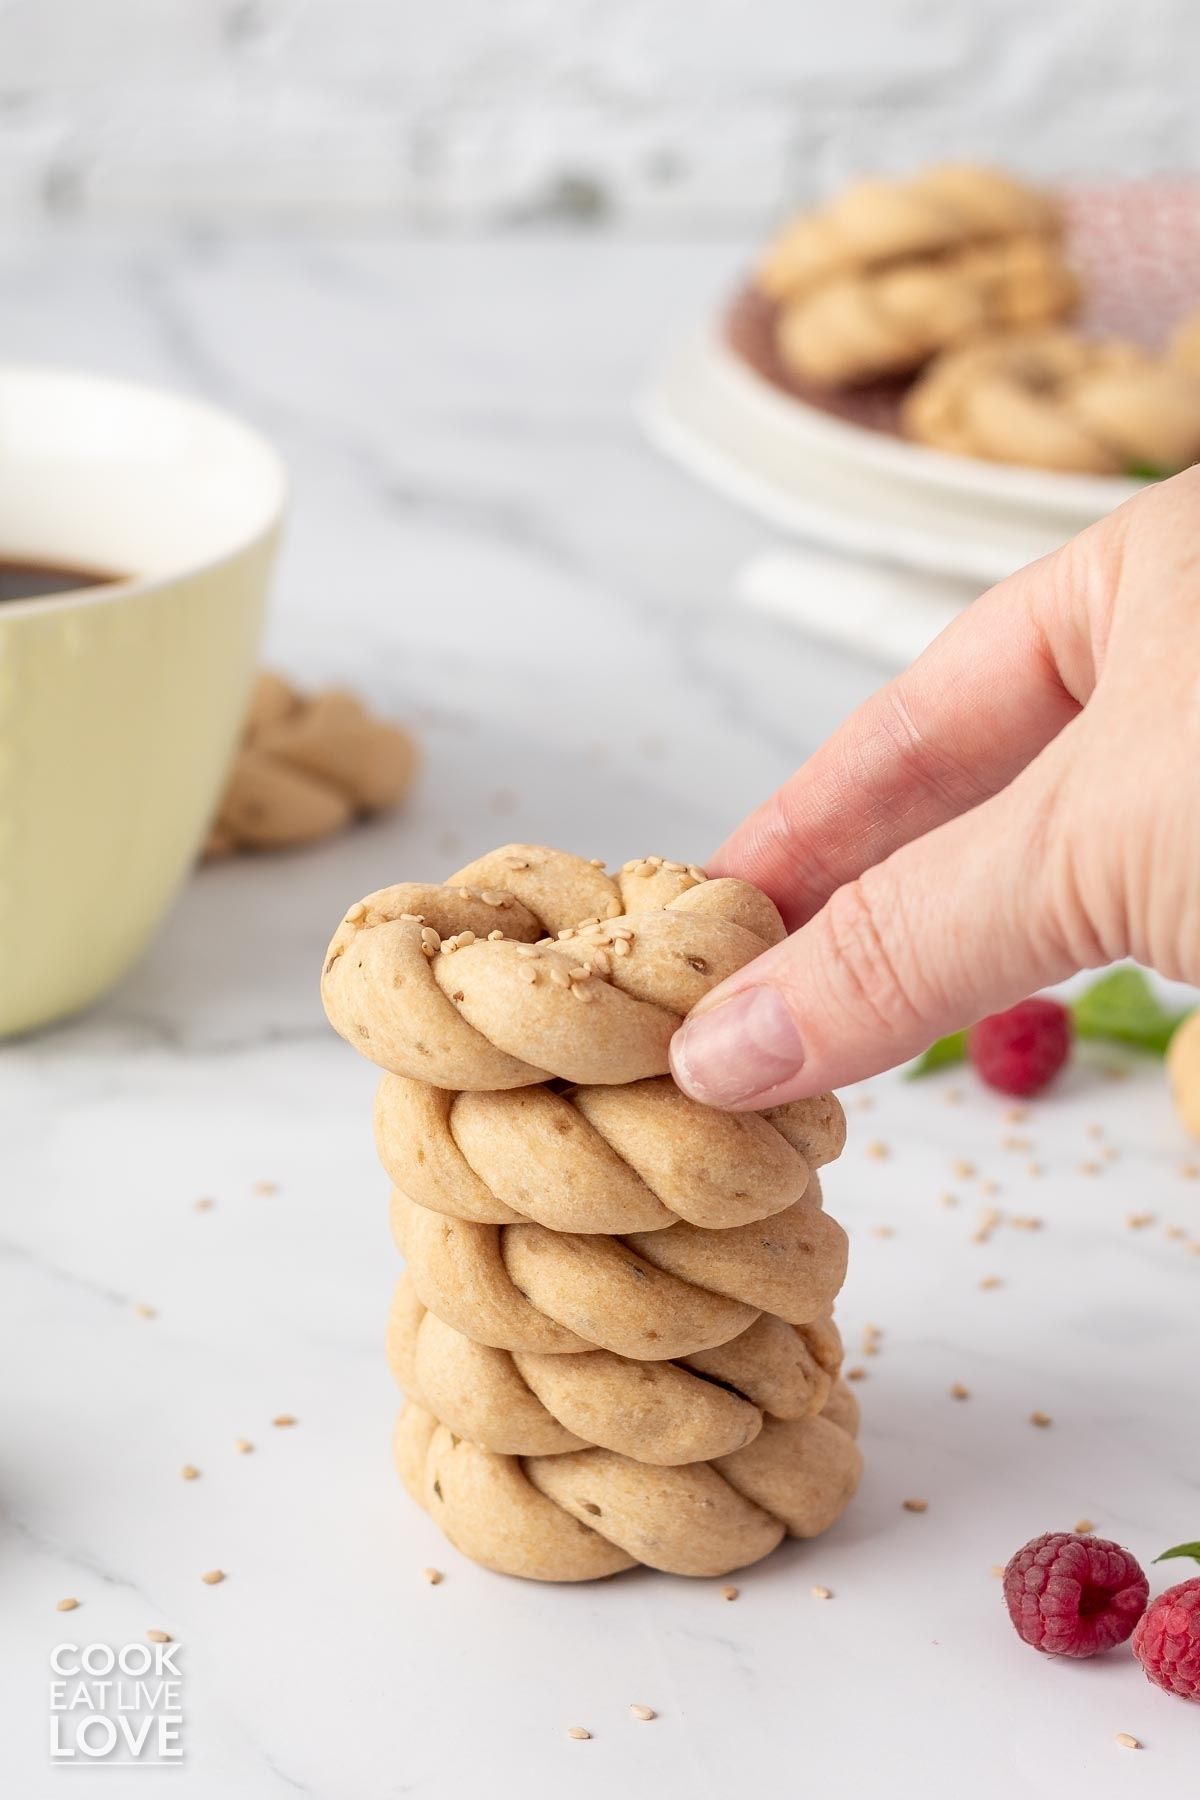 A stack of Peruvian anise cookies with a hand reaching to grab one.